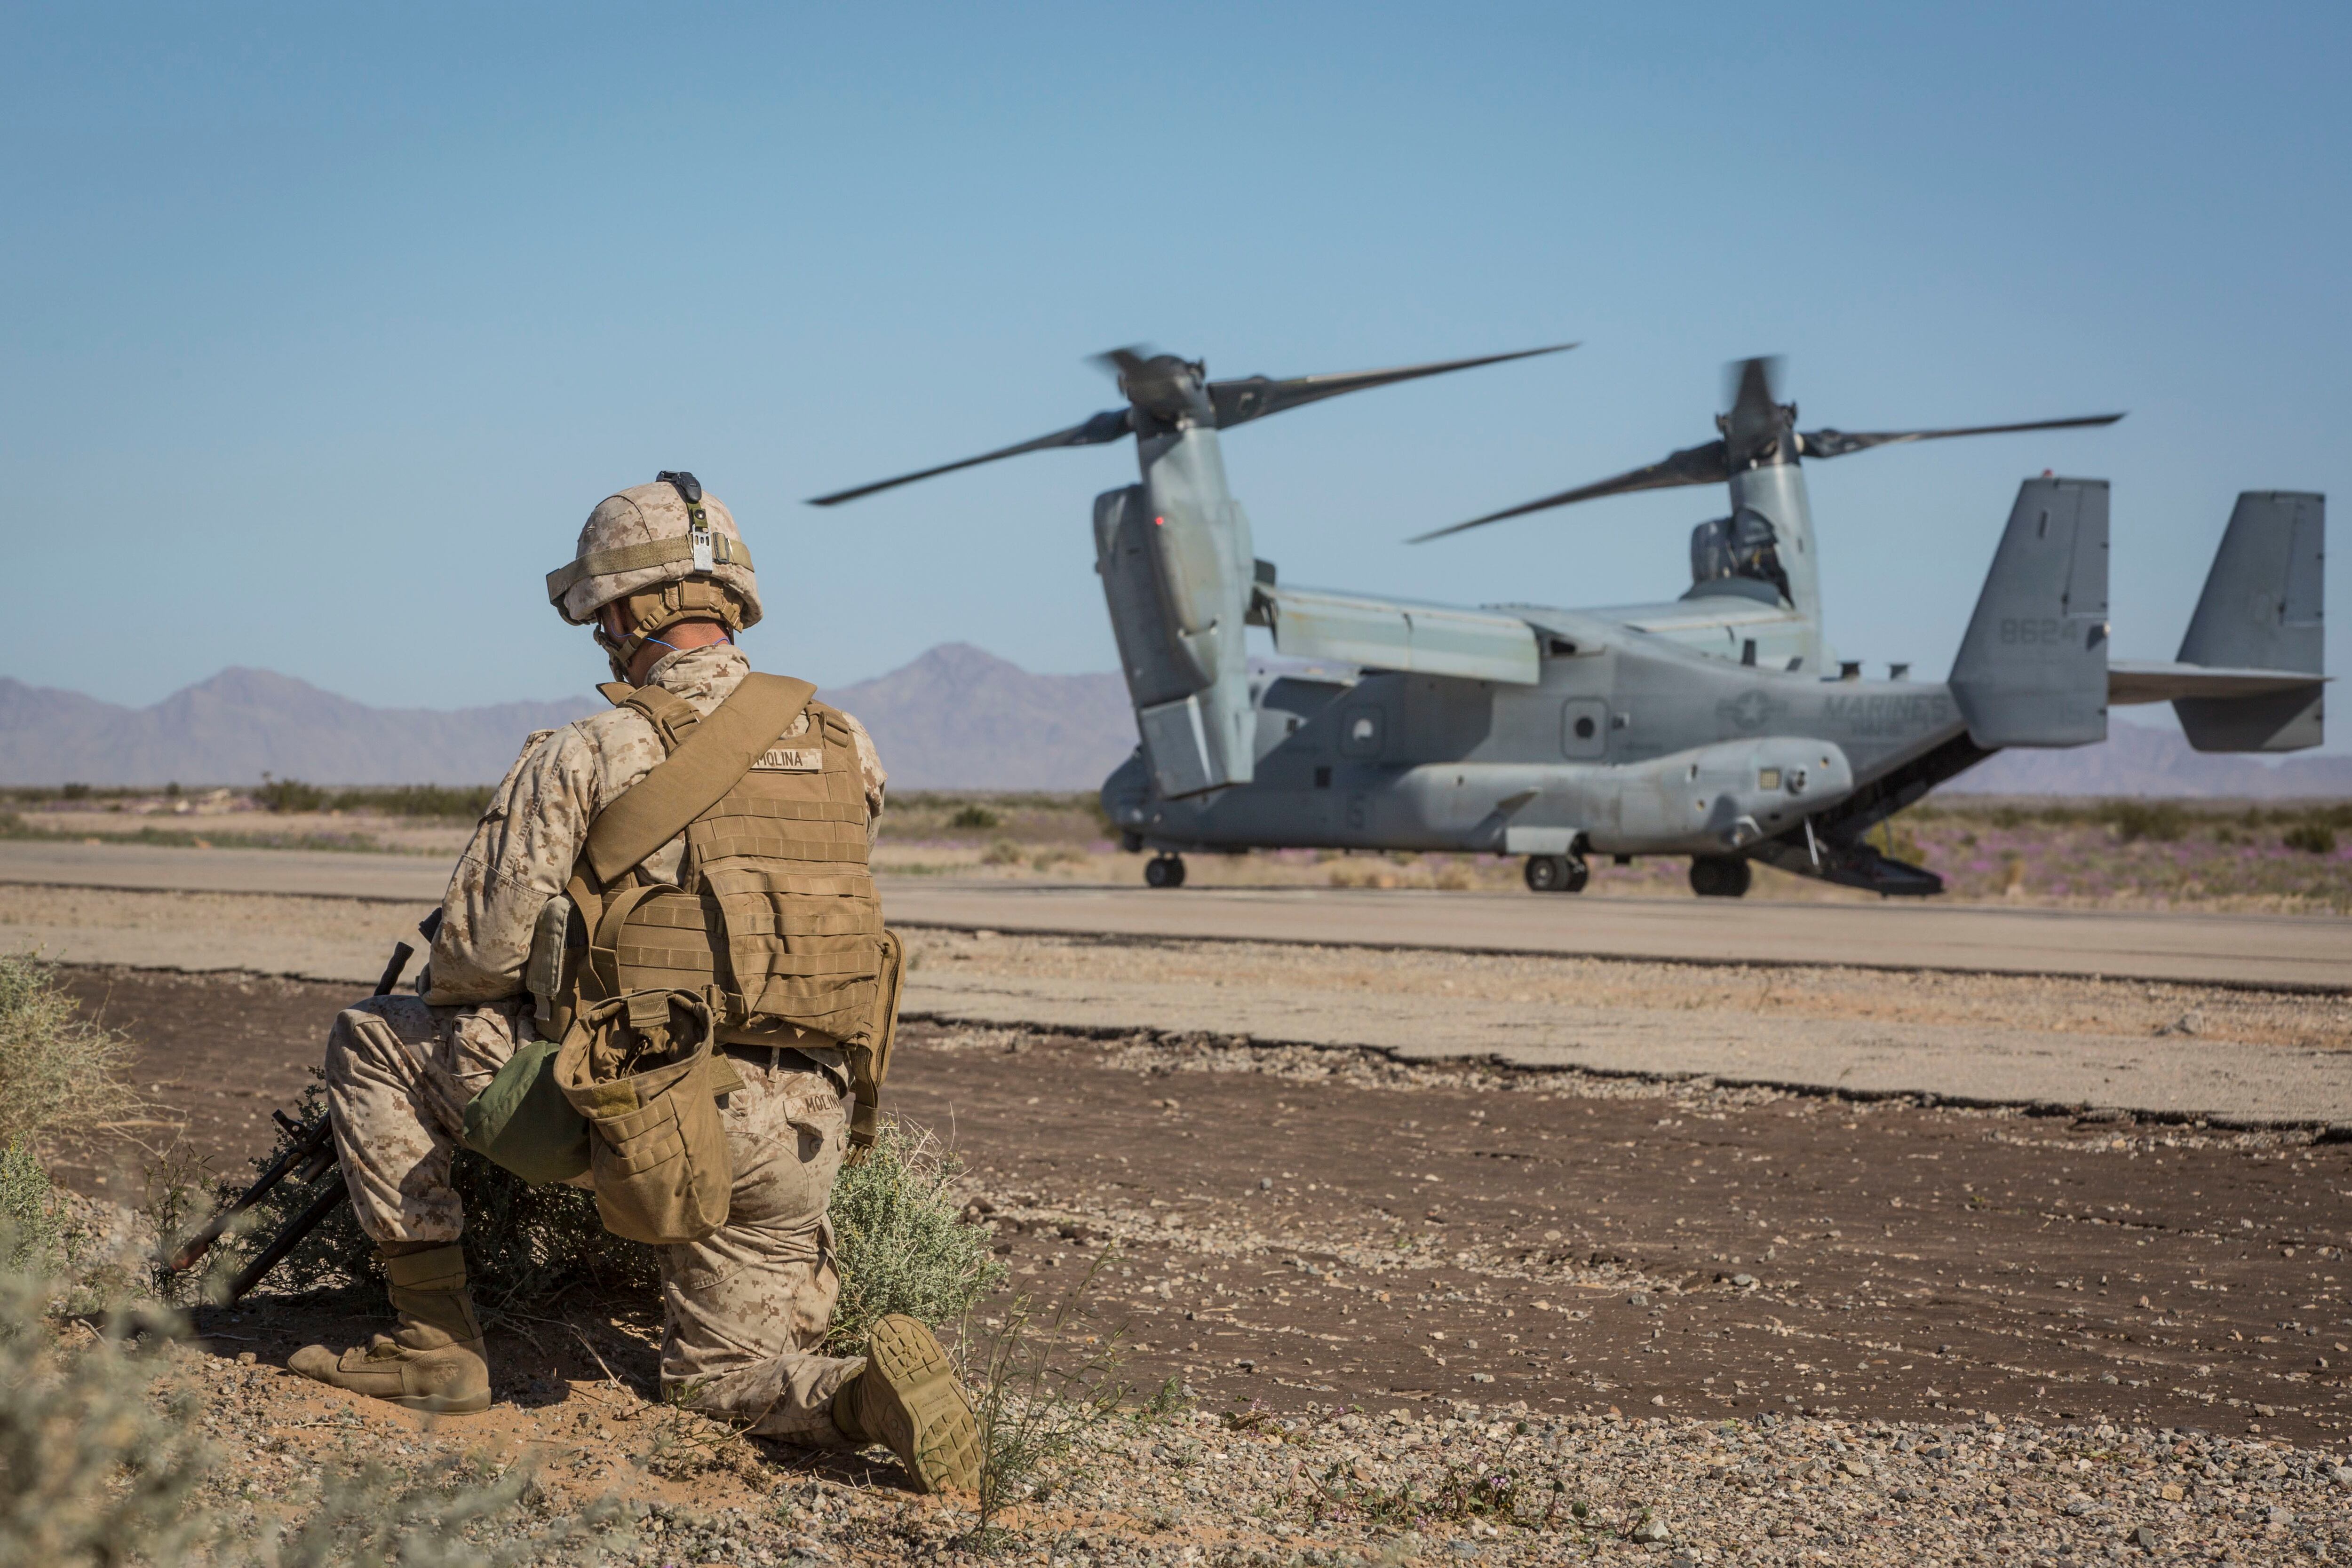 New aviation tech changes Marine Corps’ mentality for future fight